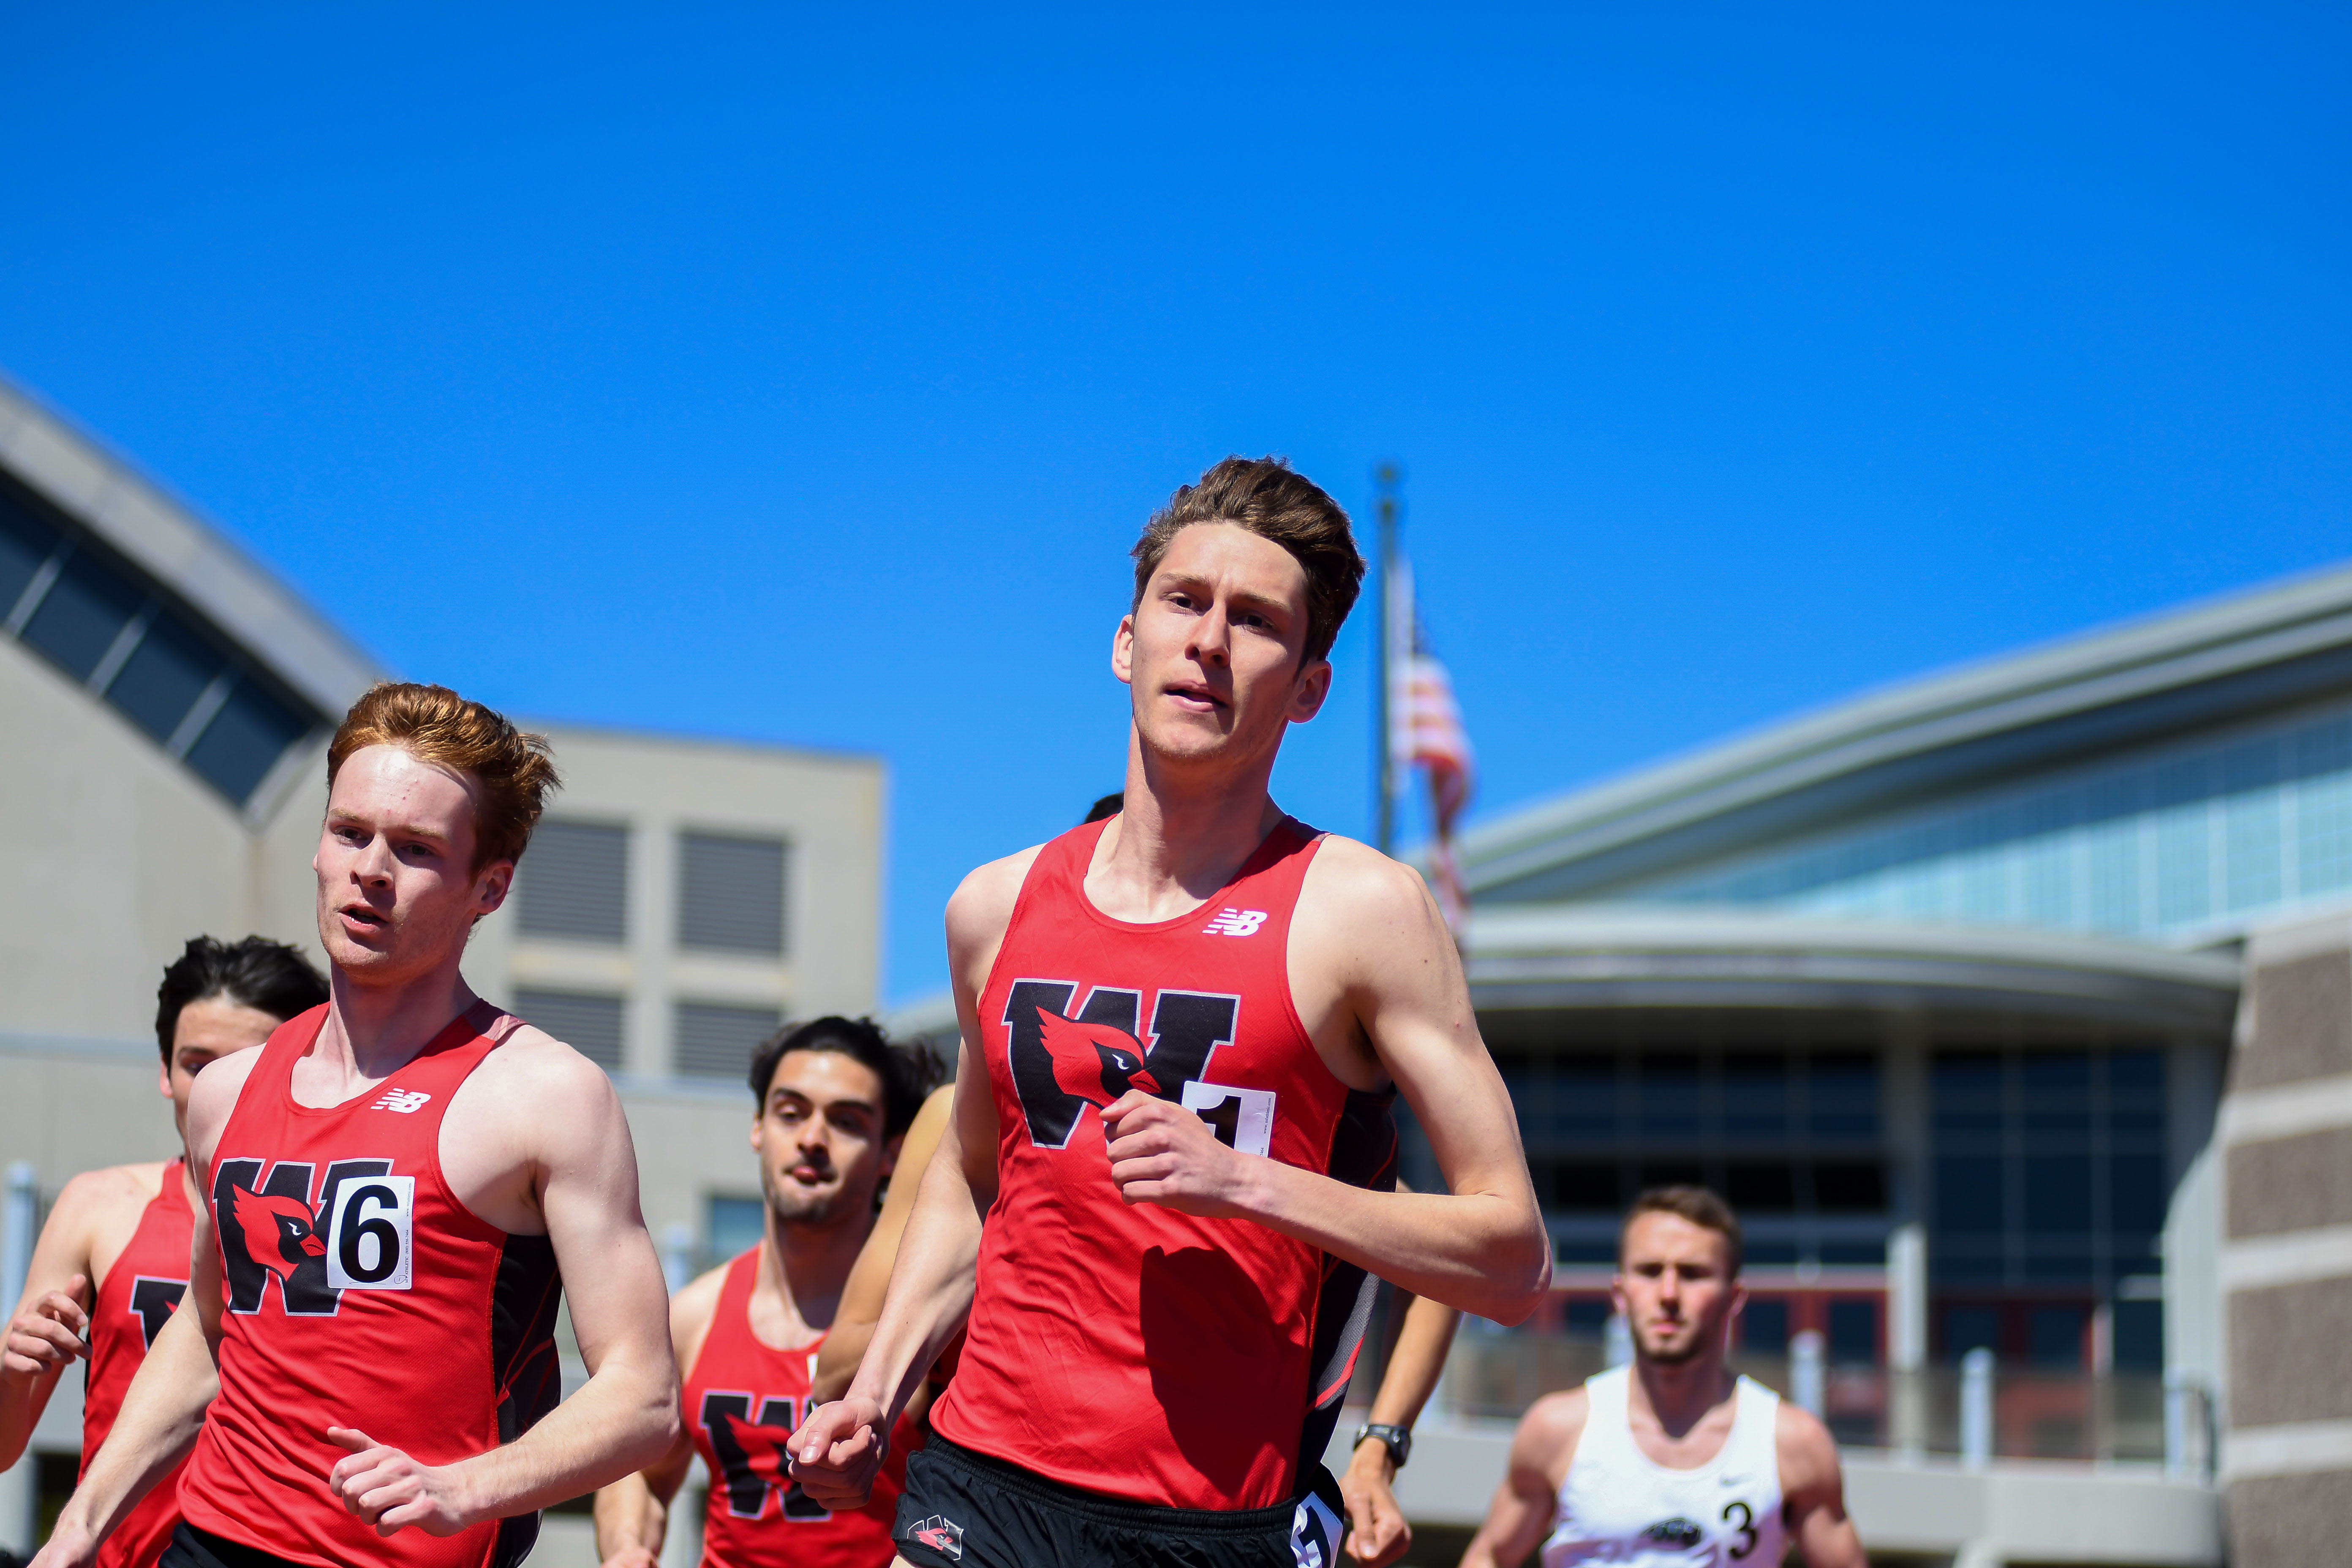 Springing Forward (and Looking Back) A 2019 Guide to Wesleyan Spring